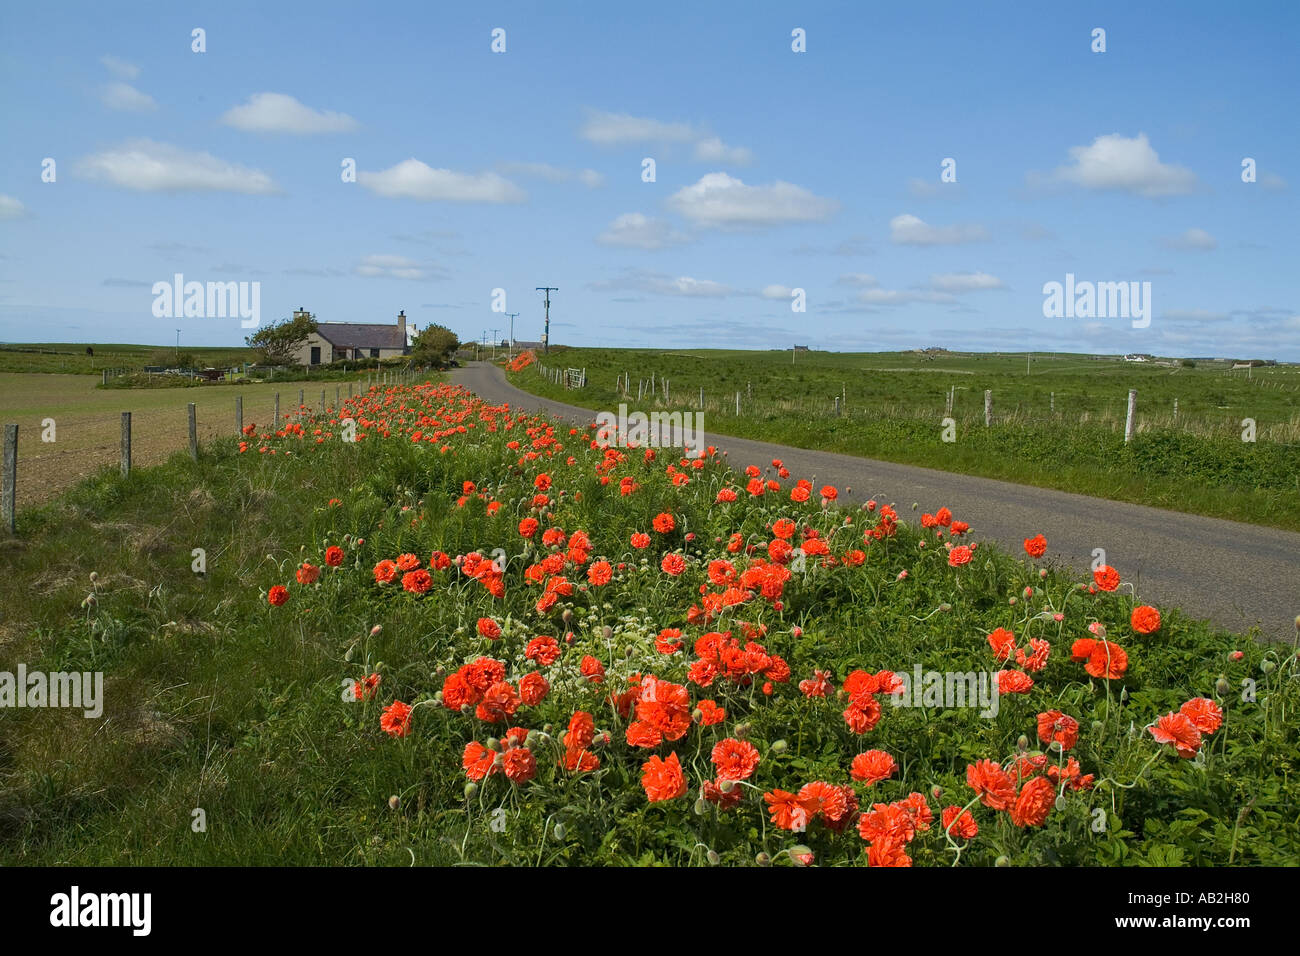 dh Grimeston HARRAY ORKNEY Red poppies at side of country road poppy roadside uk scotland wild flowers verge Stock Photo